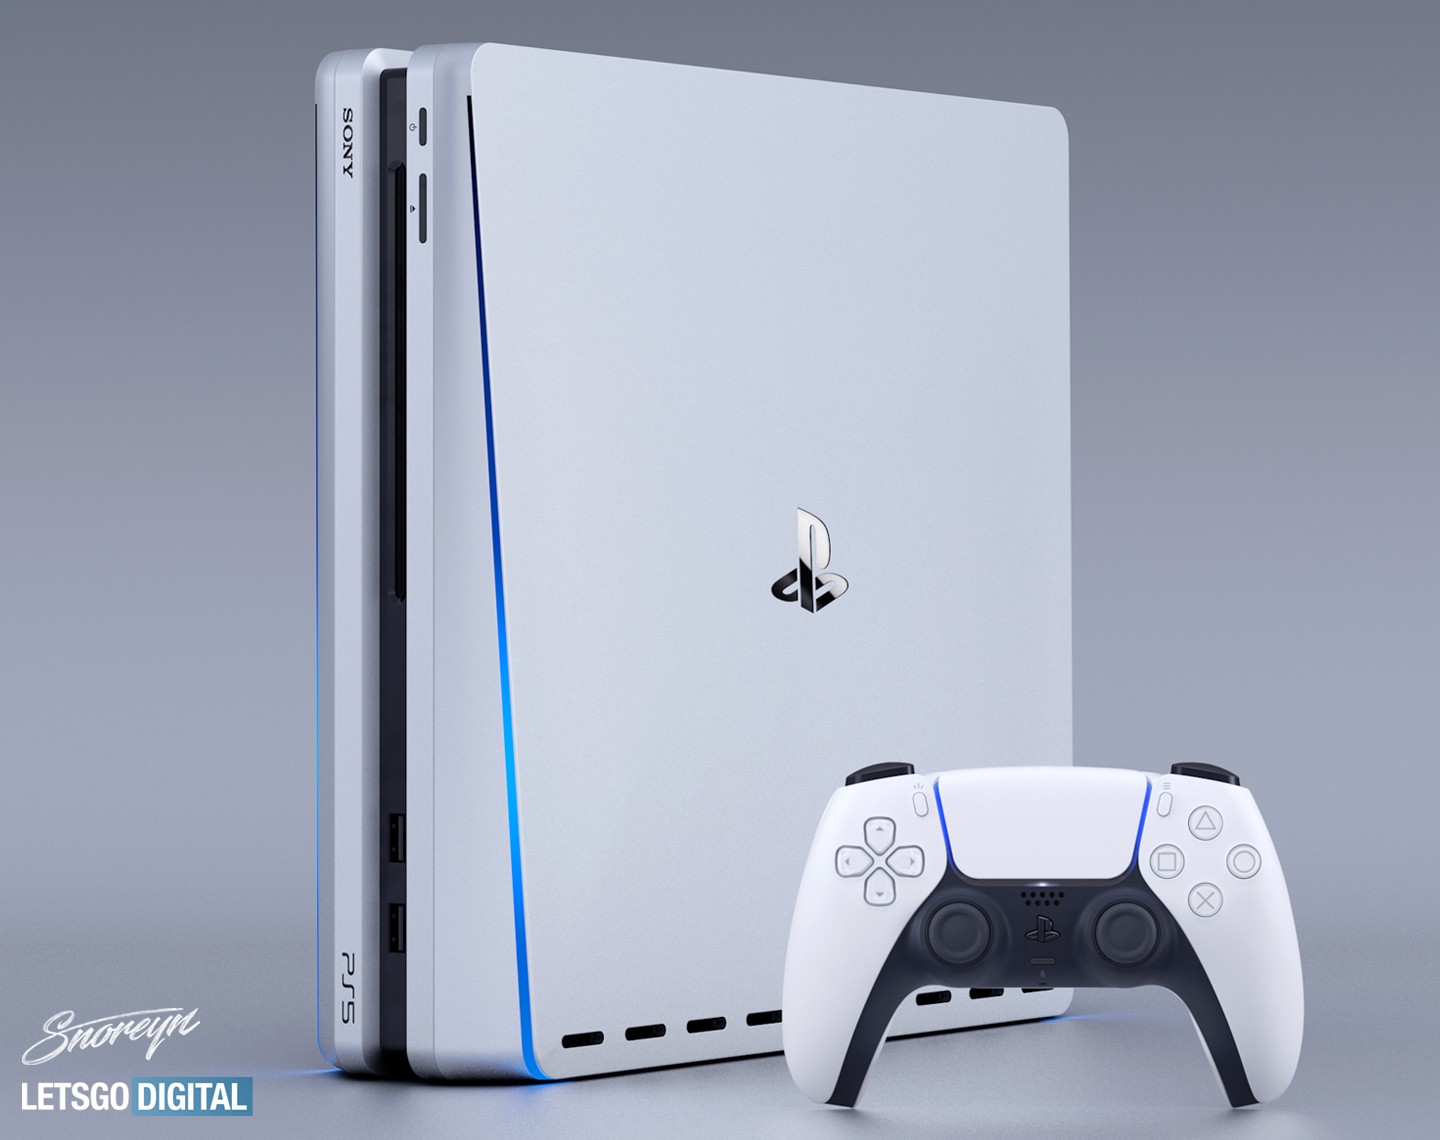 What Do You Think Of This Sony PlayStation 5 Slim Concept Render